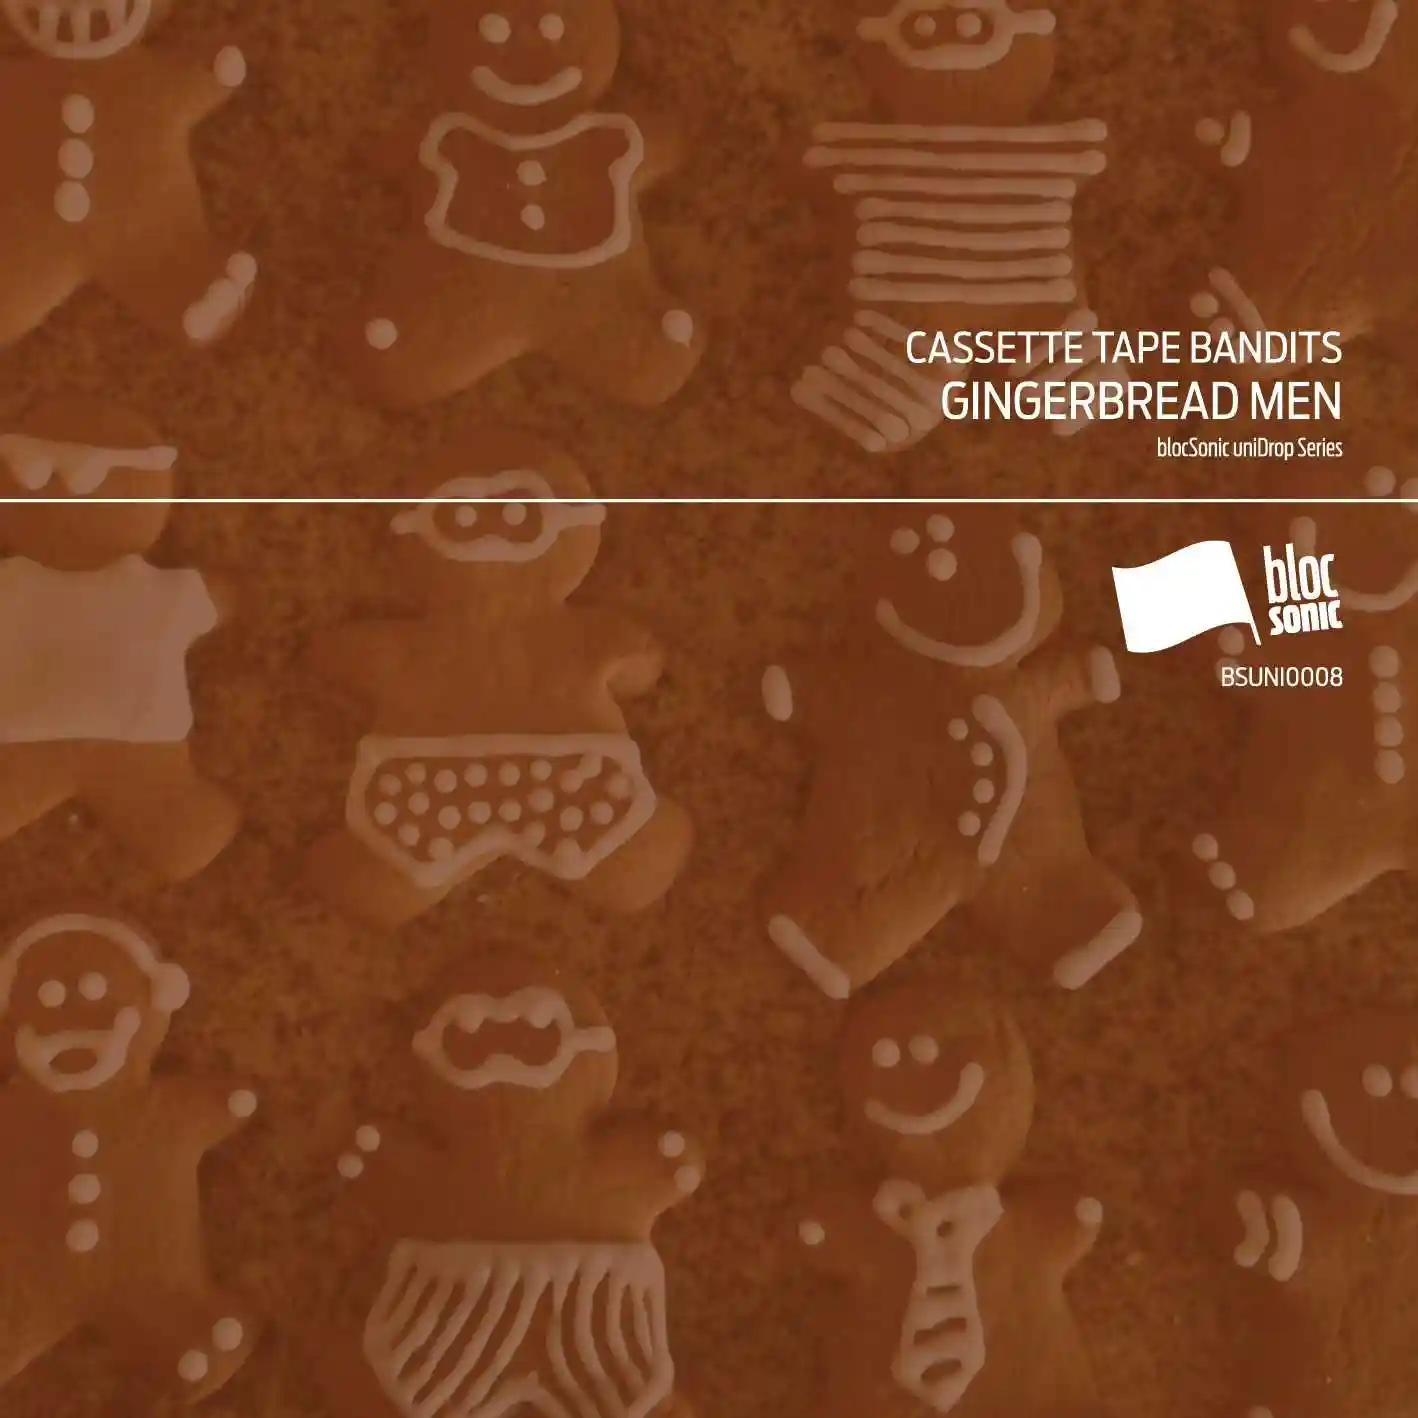 Album cover for “Gingerbread Men” by Cassette Tape Bandits